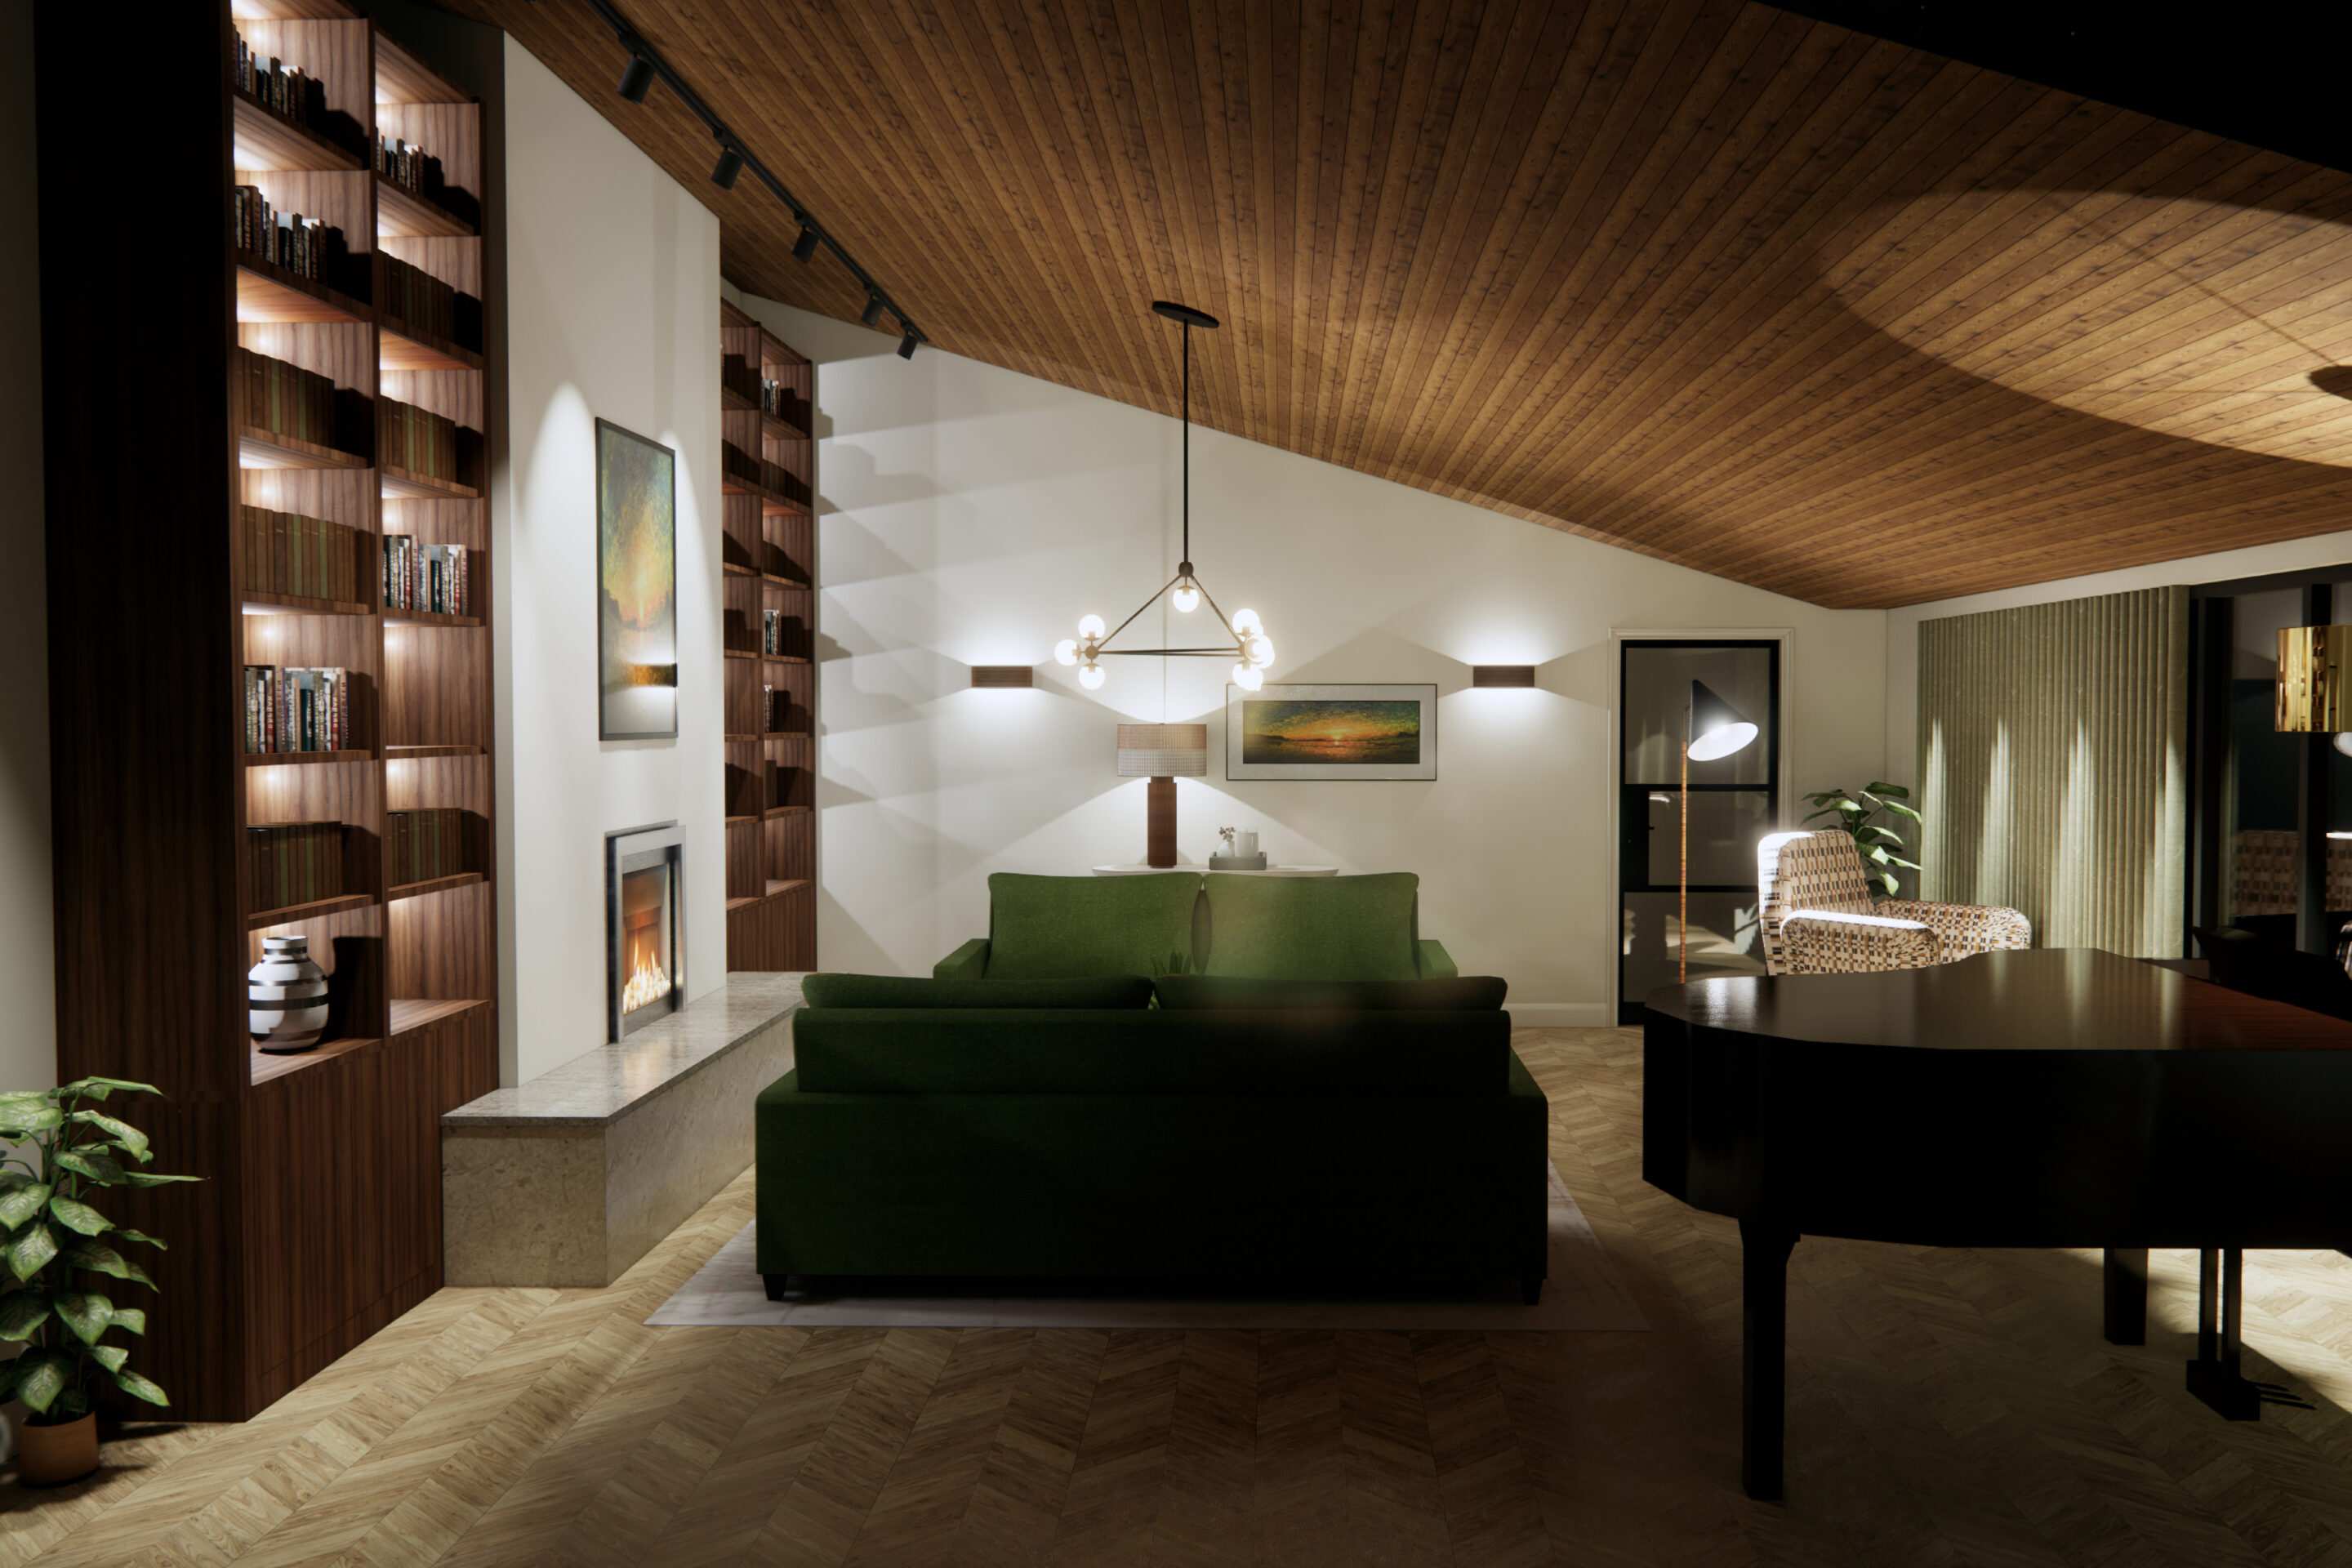 The picture shows a rendered visual of the lighting scheme in a sitting room with Task, Decorative and Ambient Lighting. 